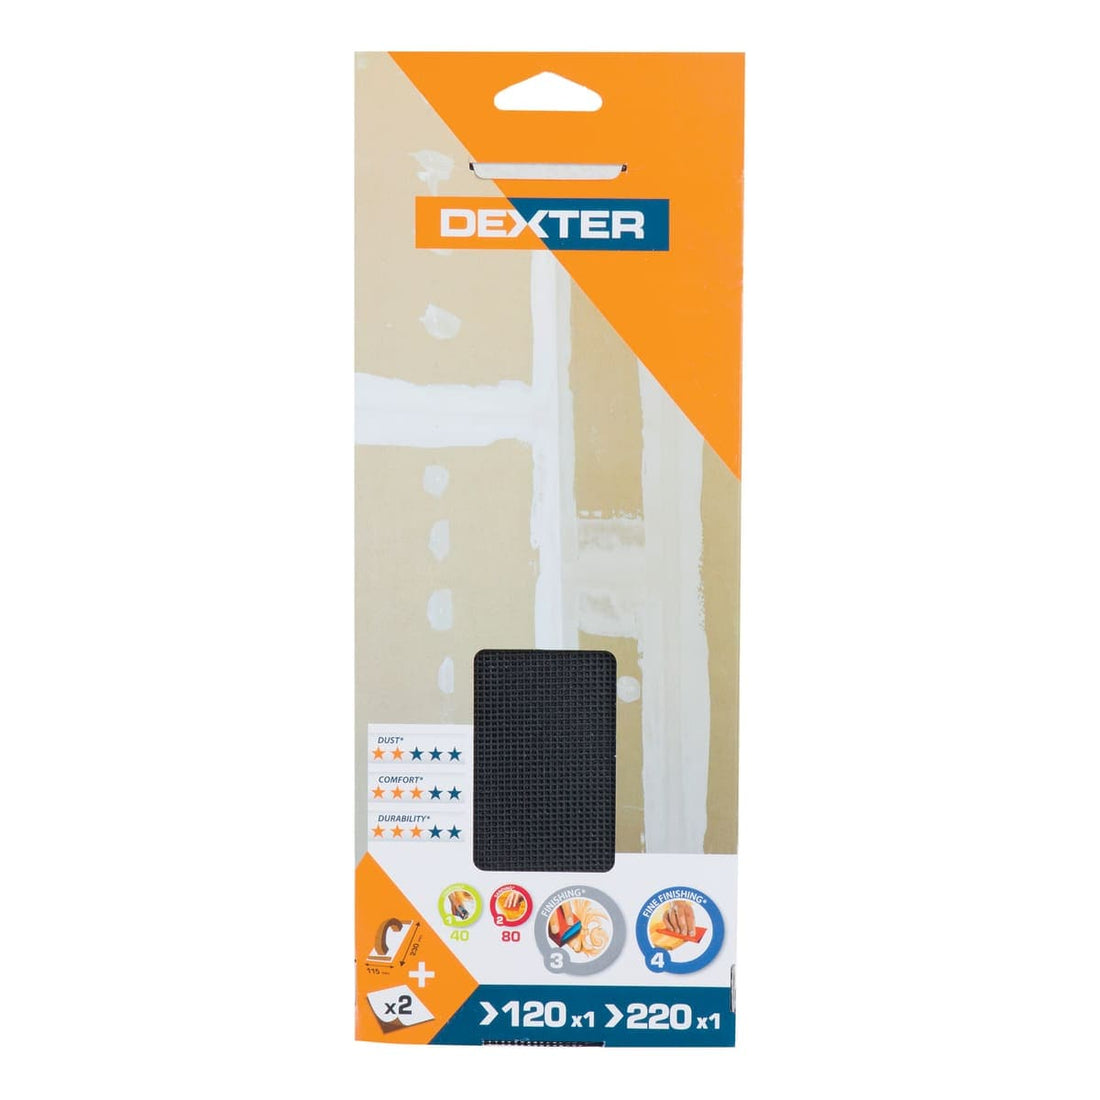 DEXTER SANDPAPER PAD 115X230MM + 2 SHEETS FOR WALL GRIT 120,220 - best price from Maltashopper.com BR400002111